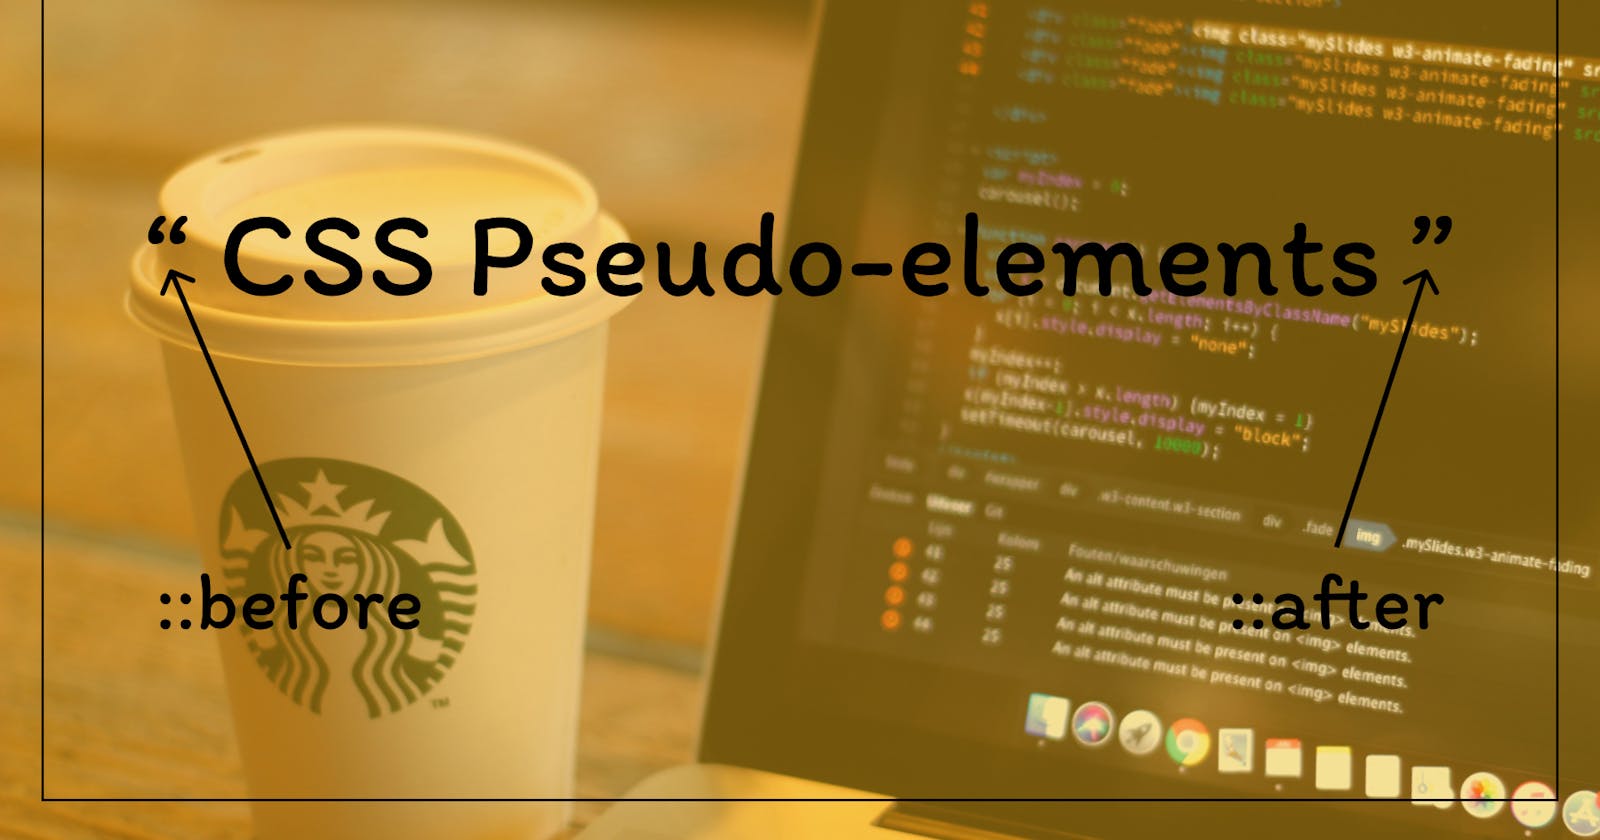 How to use Before and After pseudo-elements in CSS?